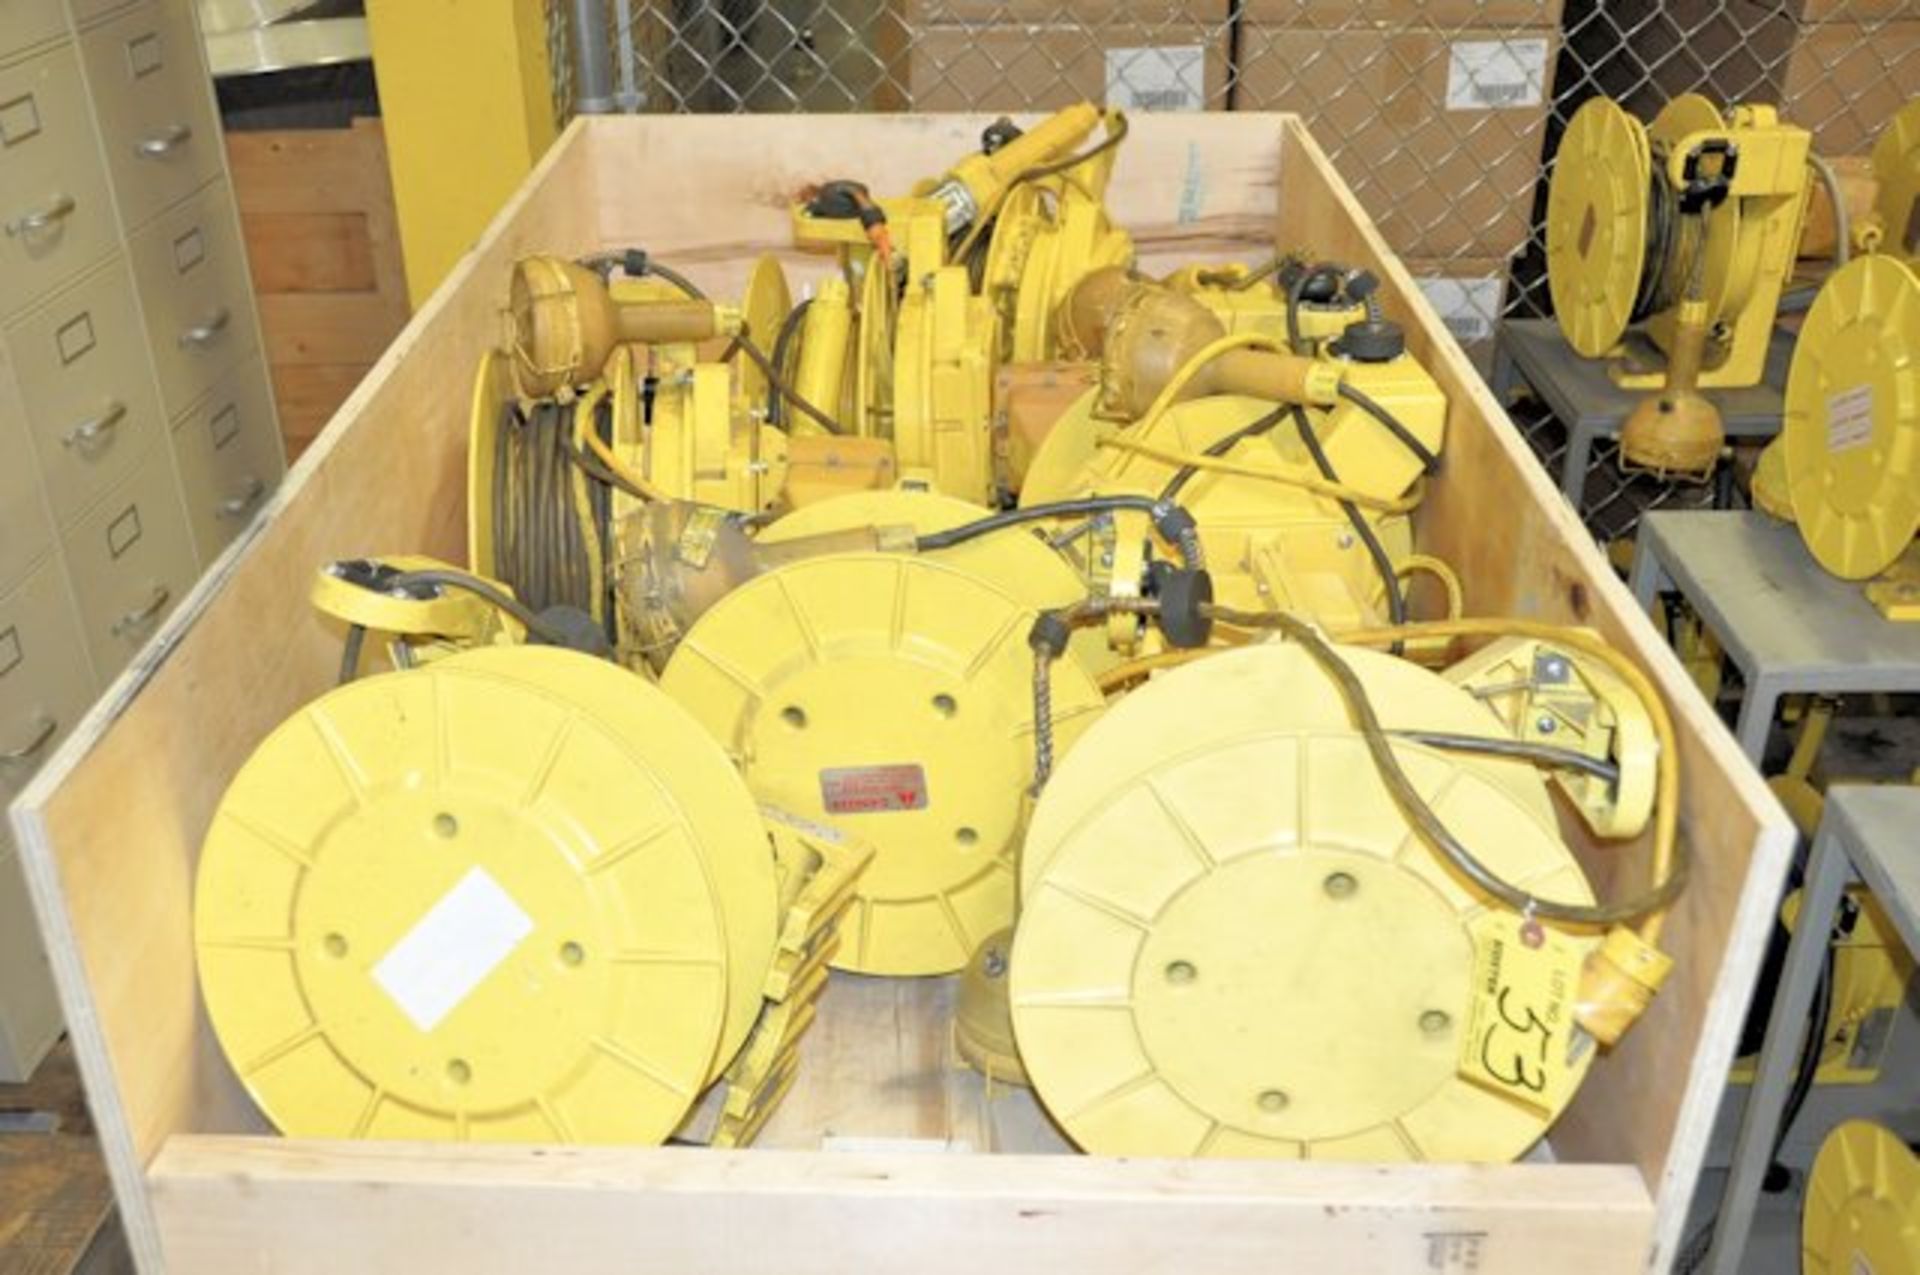 LOT OF AERO-MOTIVE INDUSTRIAL RETRACTABLE 115-VOLT LIGHT CORDS IN [1] CRATE - Image 2 of 2